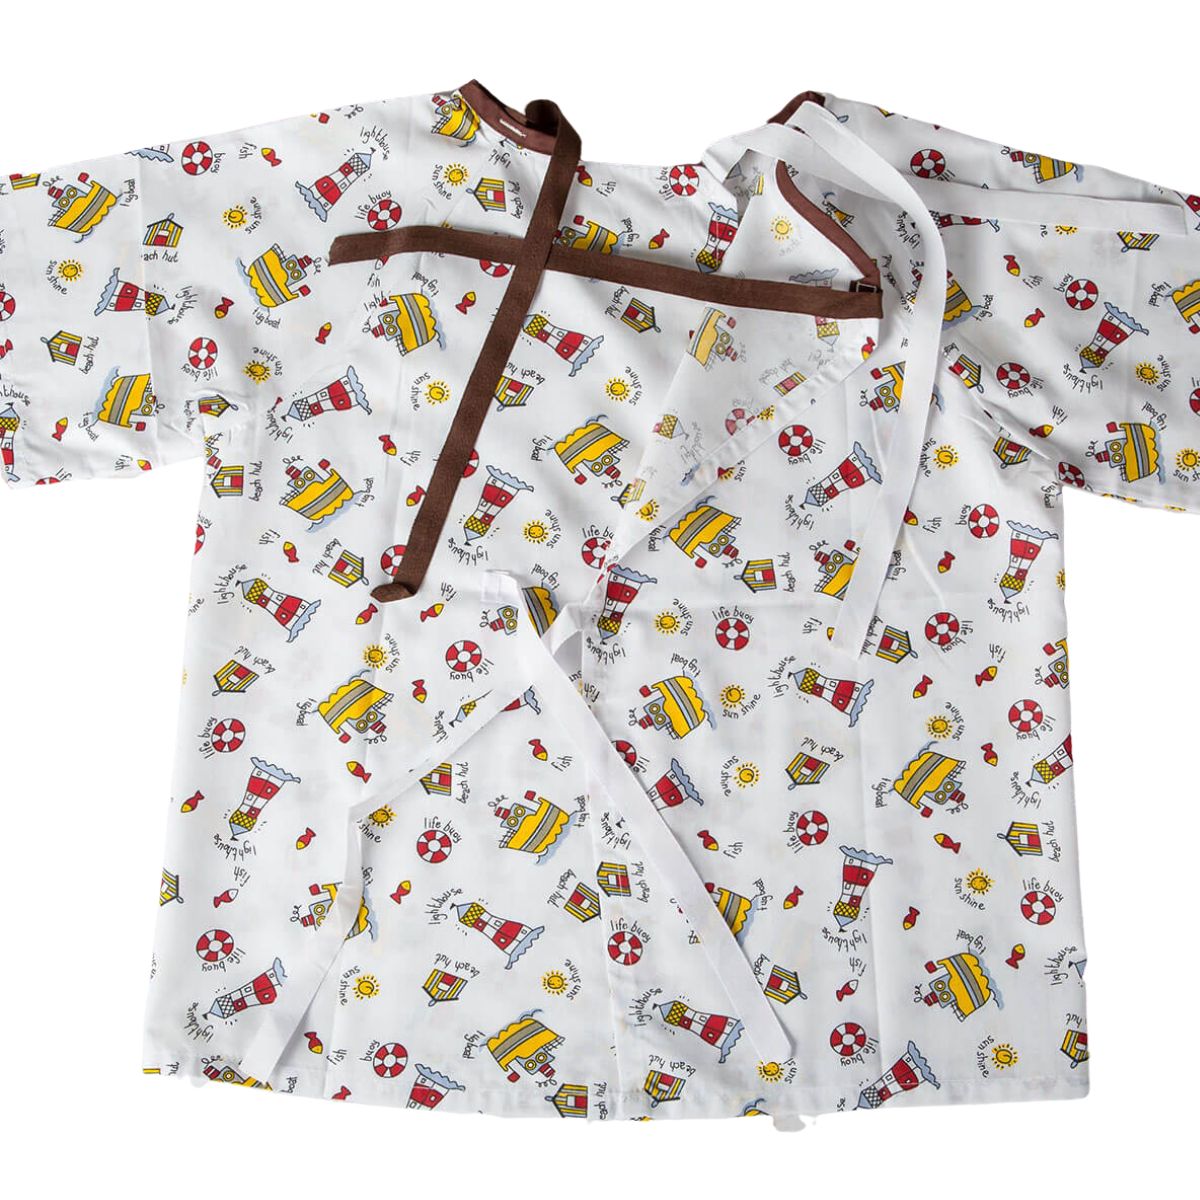 Children’s hospital operation gown